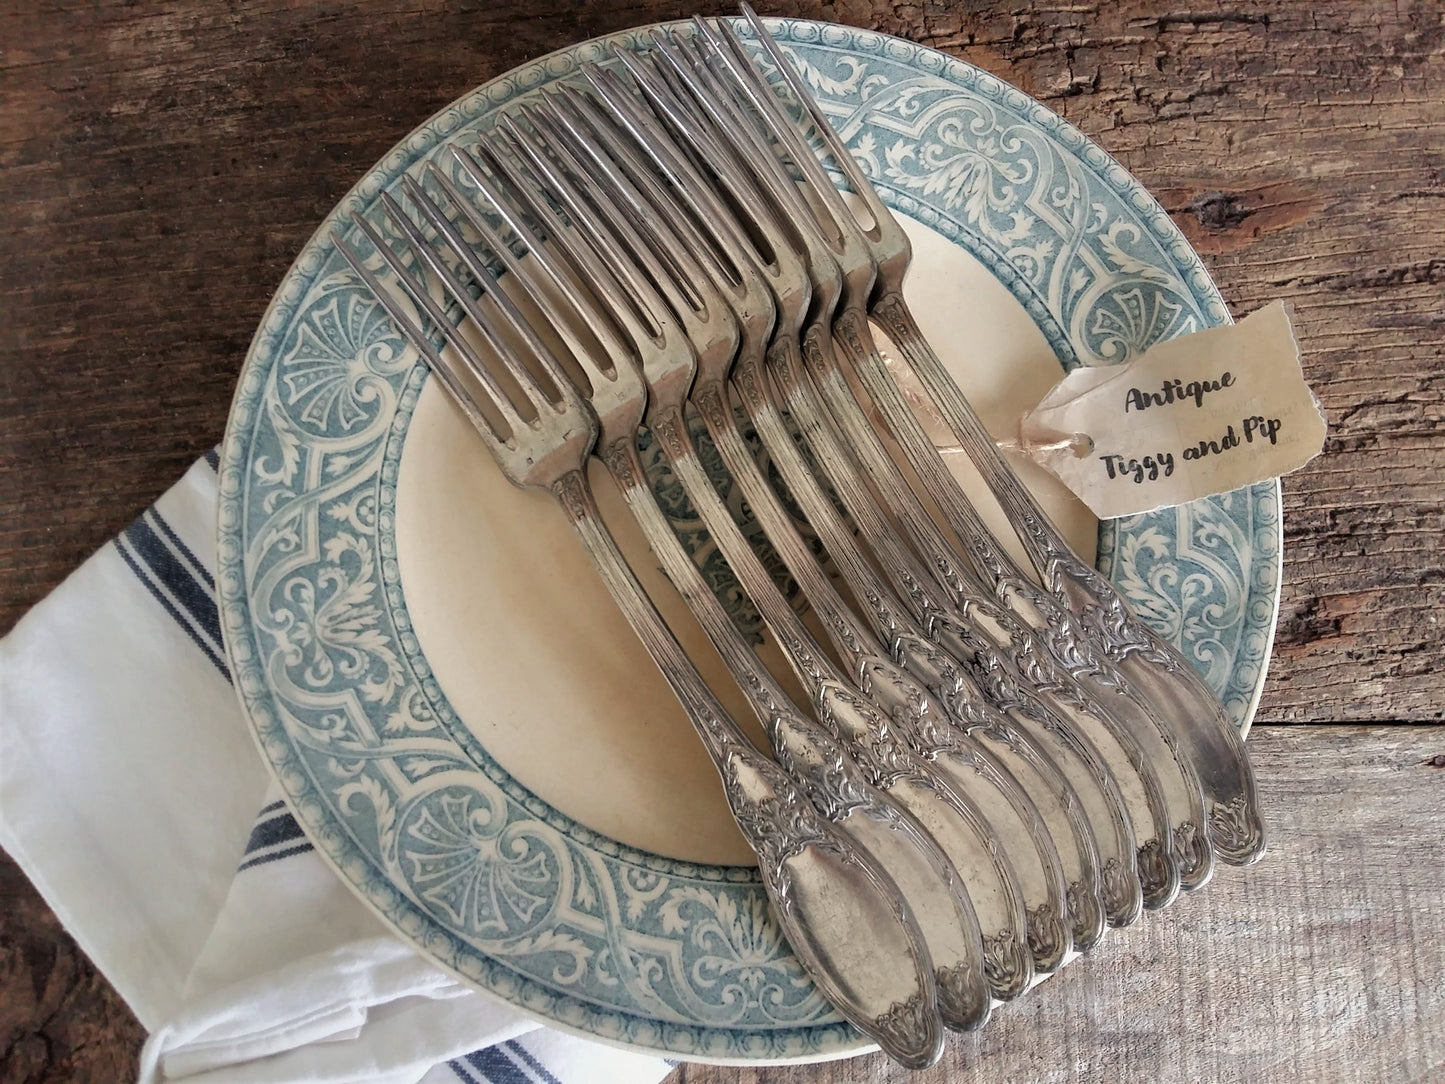 Set of 9 Silver Plated Antique Forks. from Tiggy & Pip - €78 with FREE worldwide shipping! Shop now at Tiggy and Pip